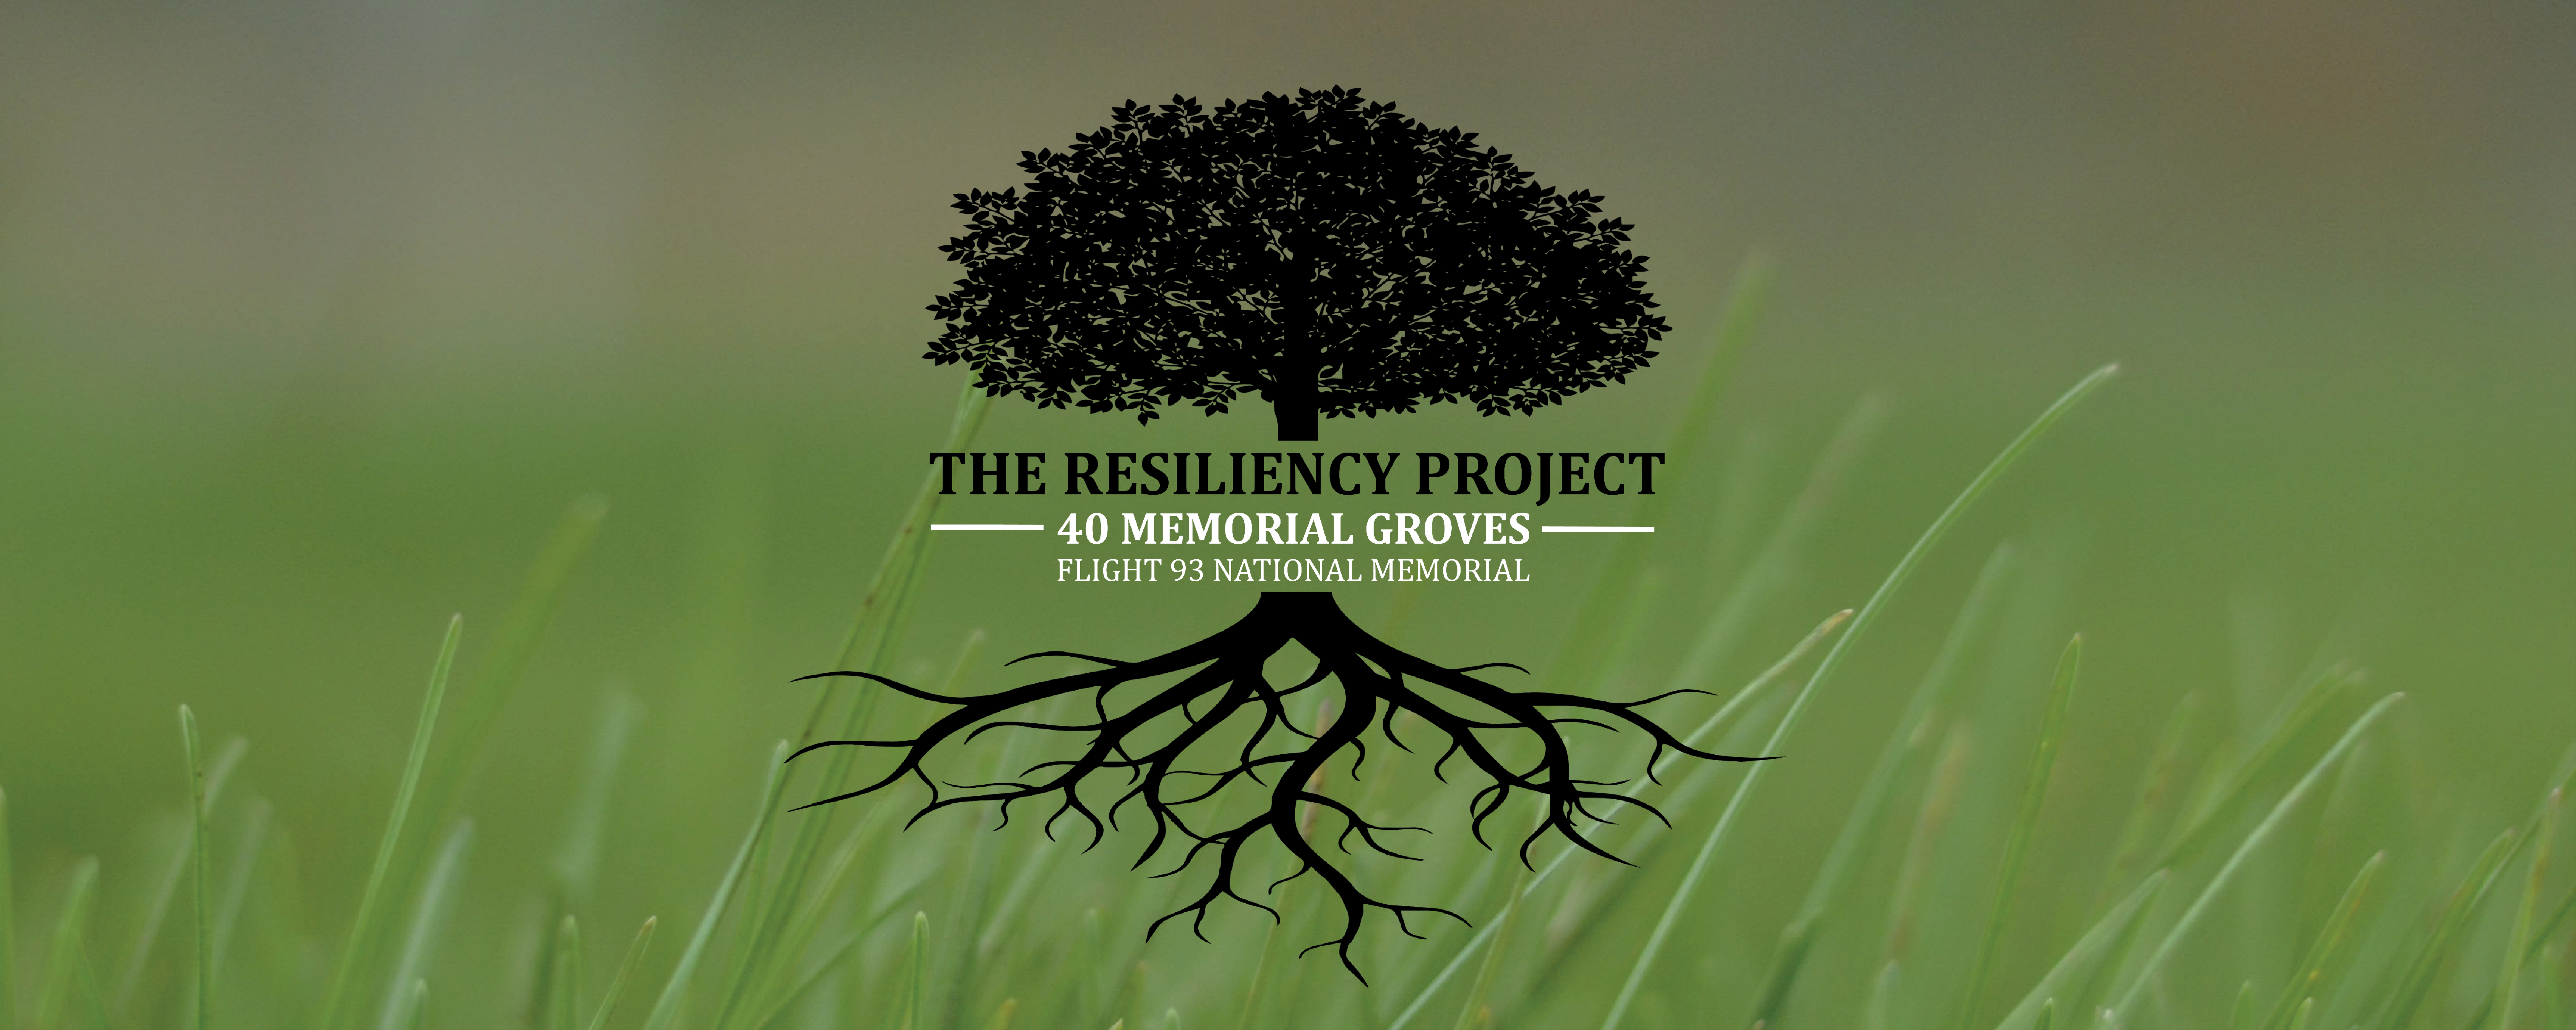 Green background with black tree with the text: "The Resiliency Project 40 Memorial Groves Flight 93 National Memorial"